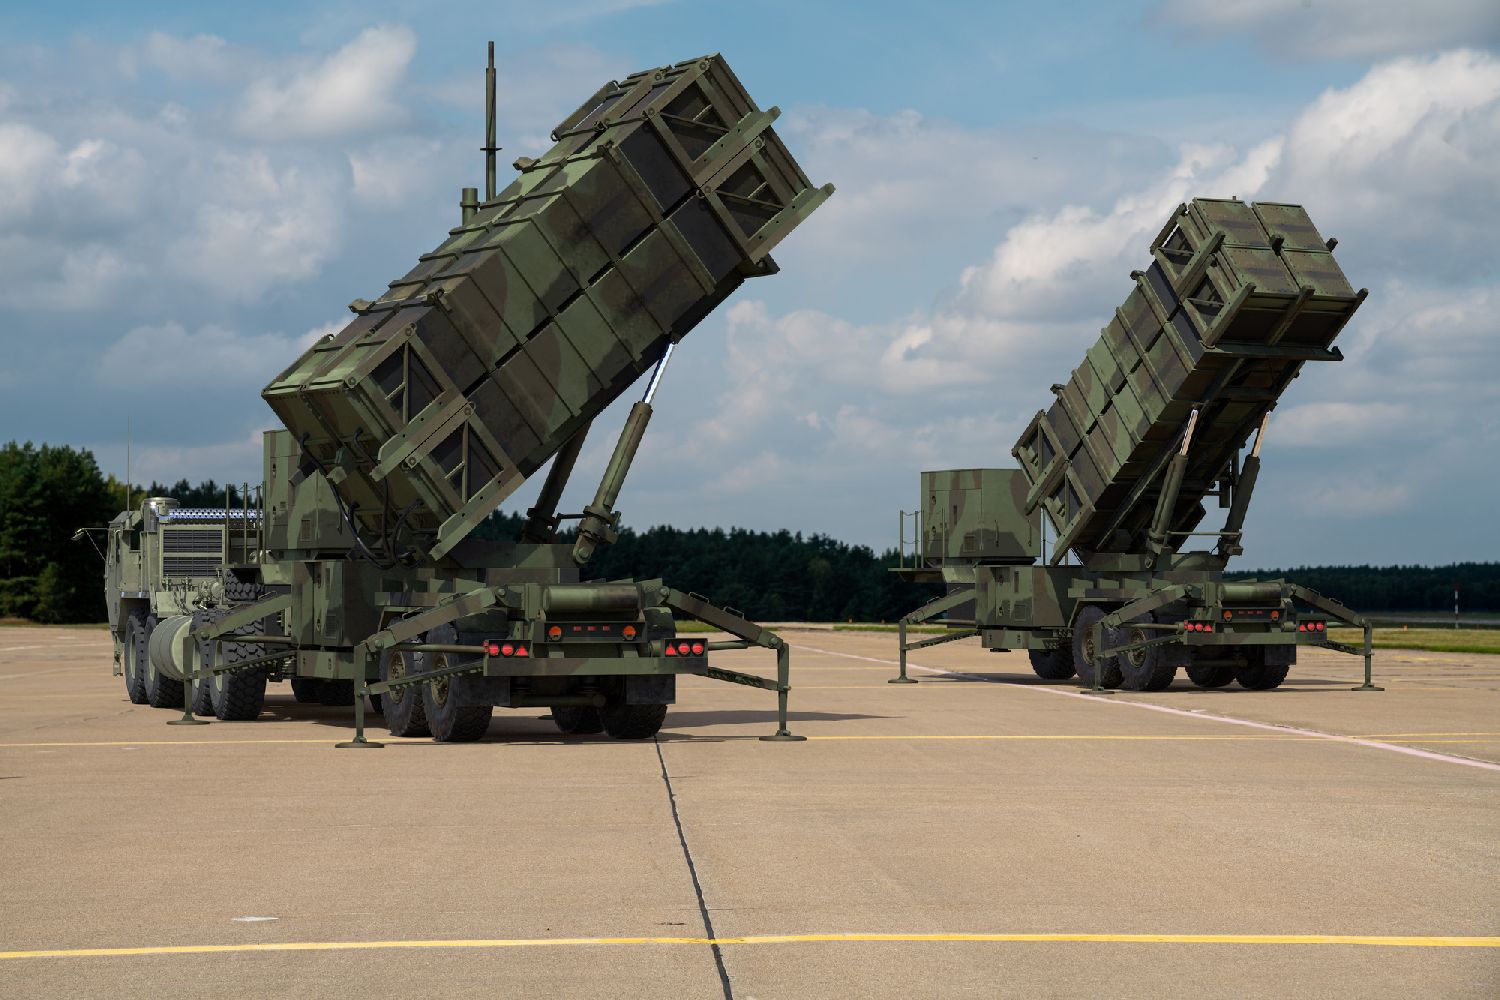 MIM-104 Patriot - American surface-to-air missile system developed by Raytheon to protect strategic targets